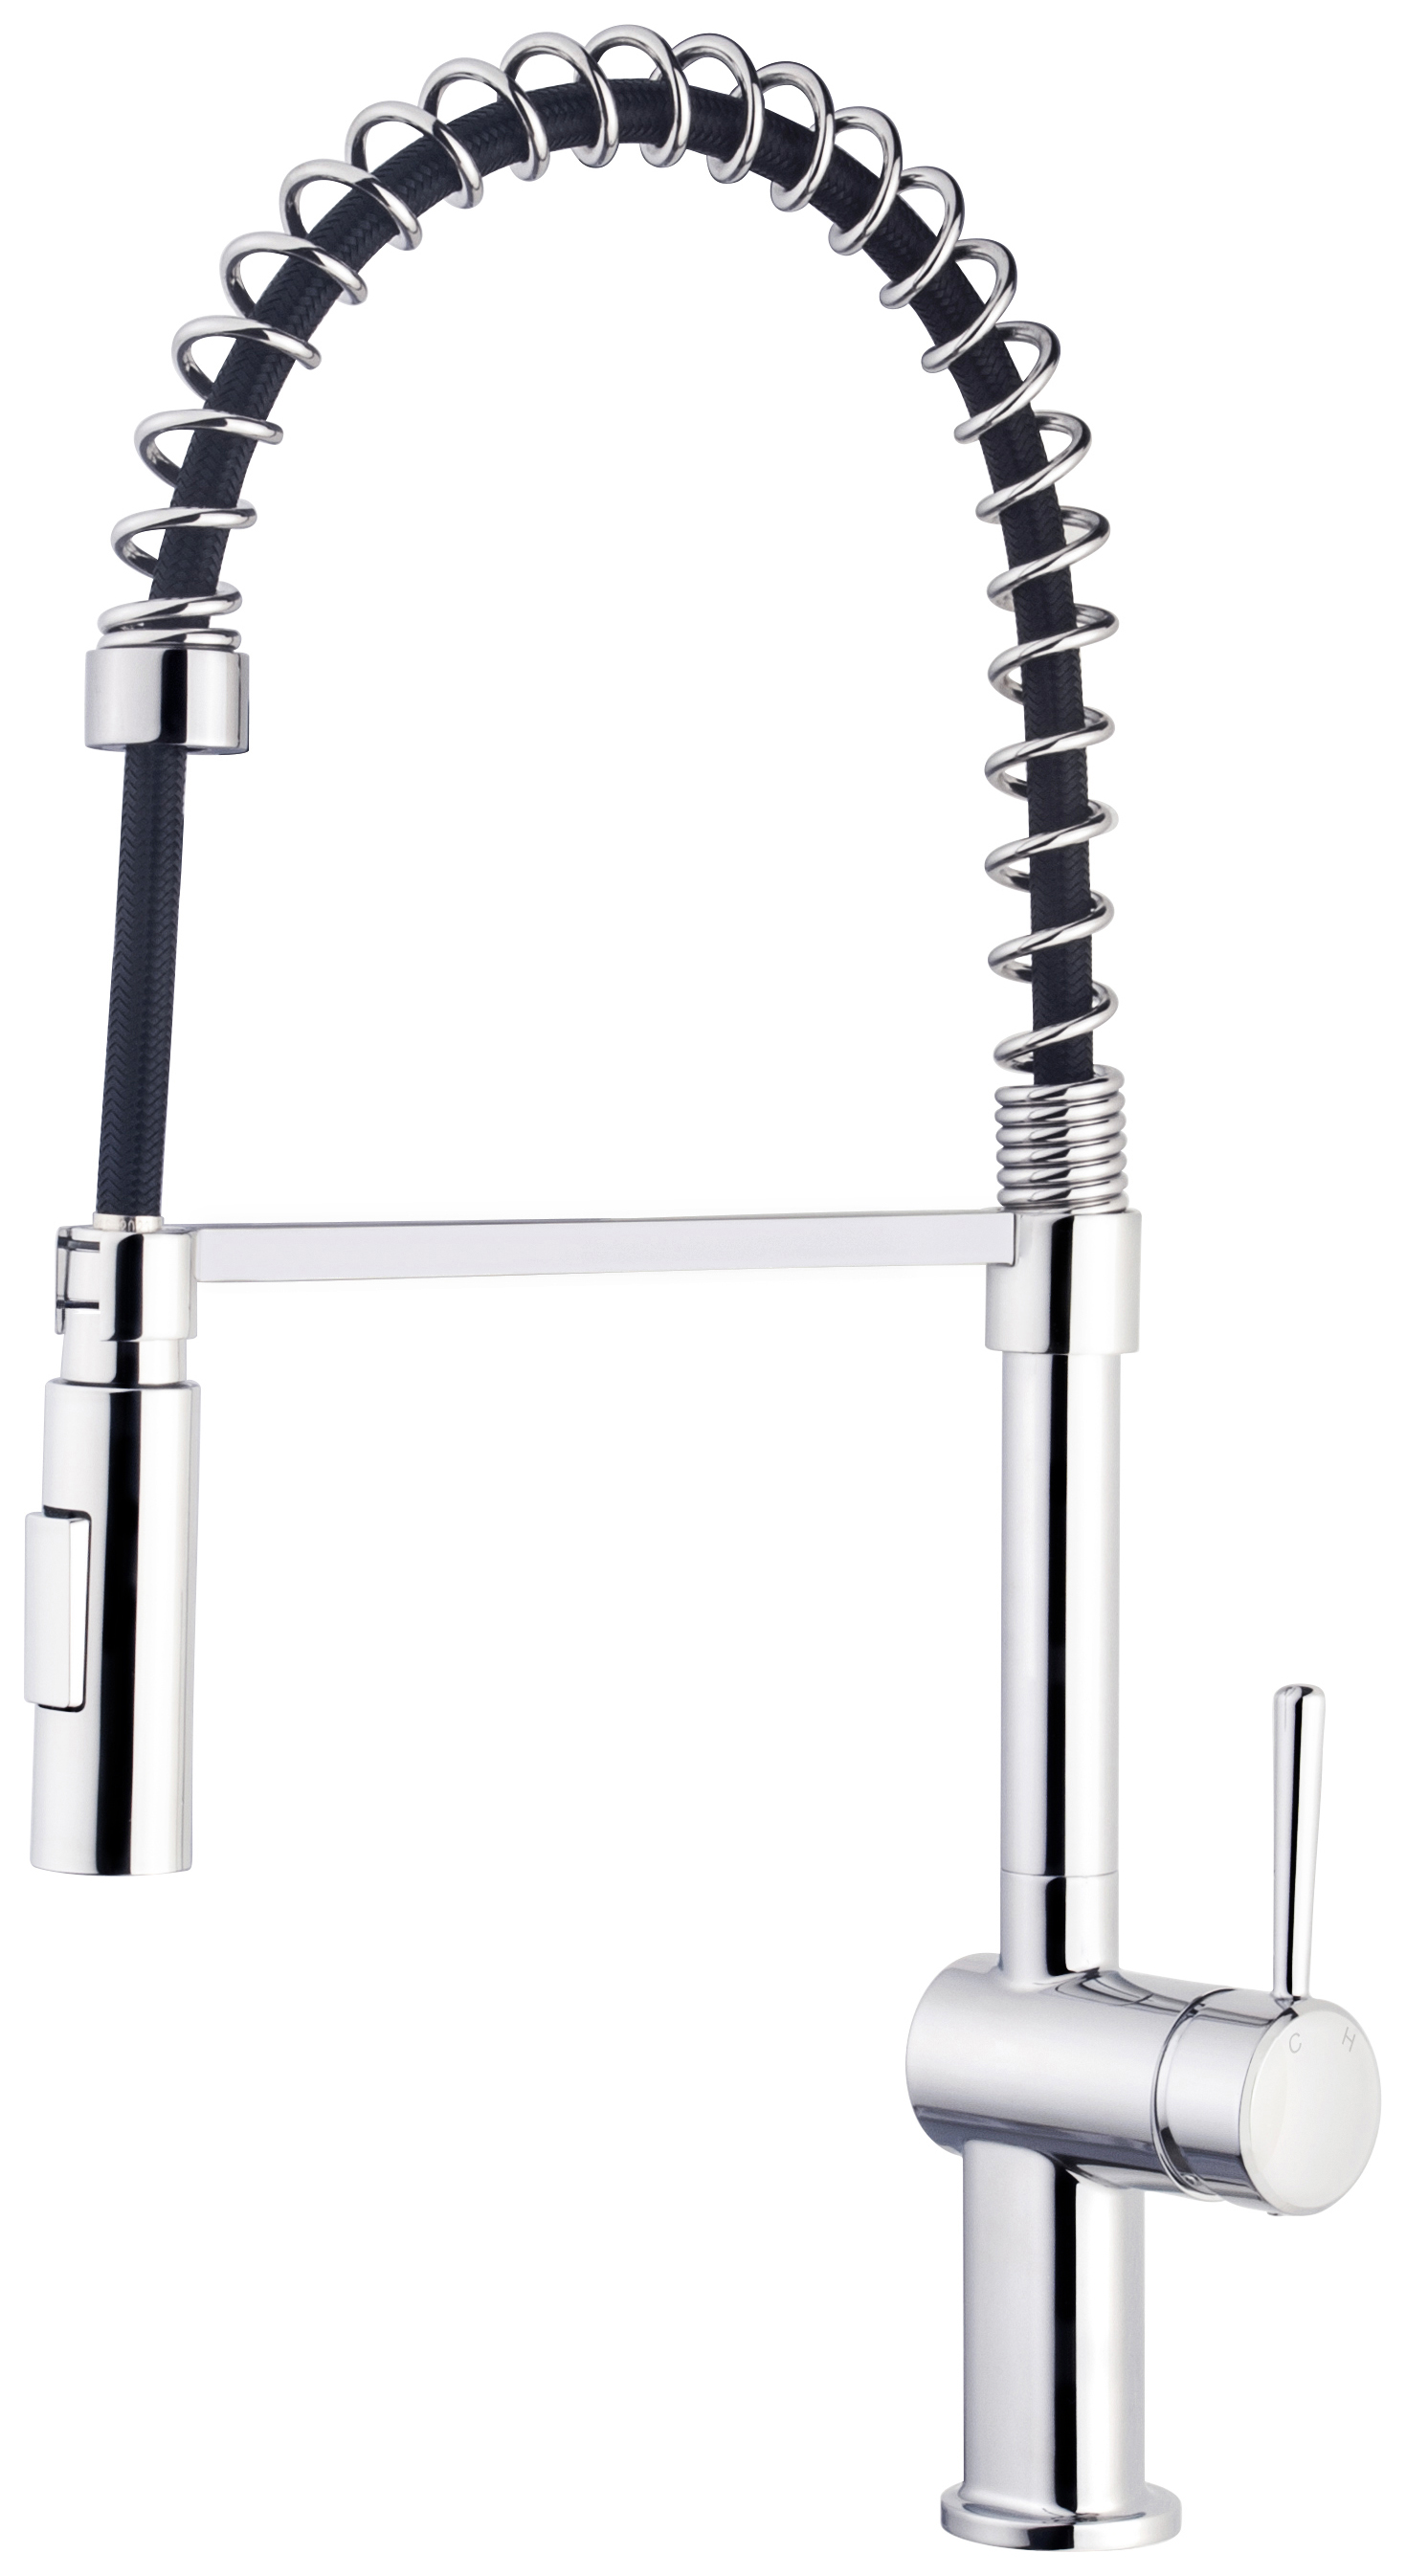 Wickes Savannah Pull Out Tap - Chrome